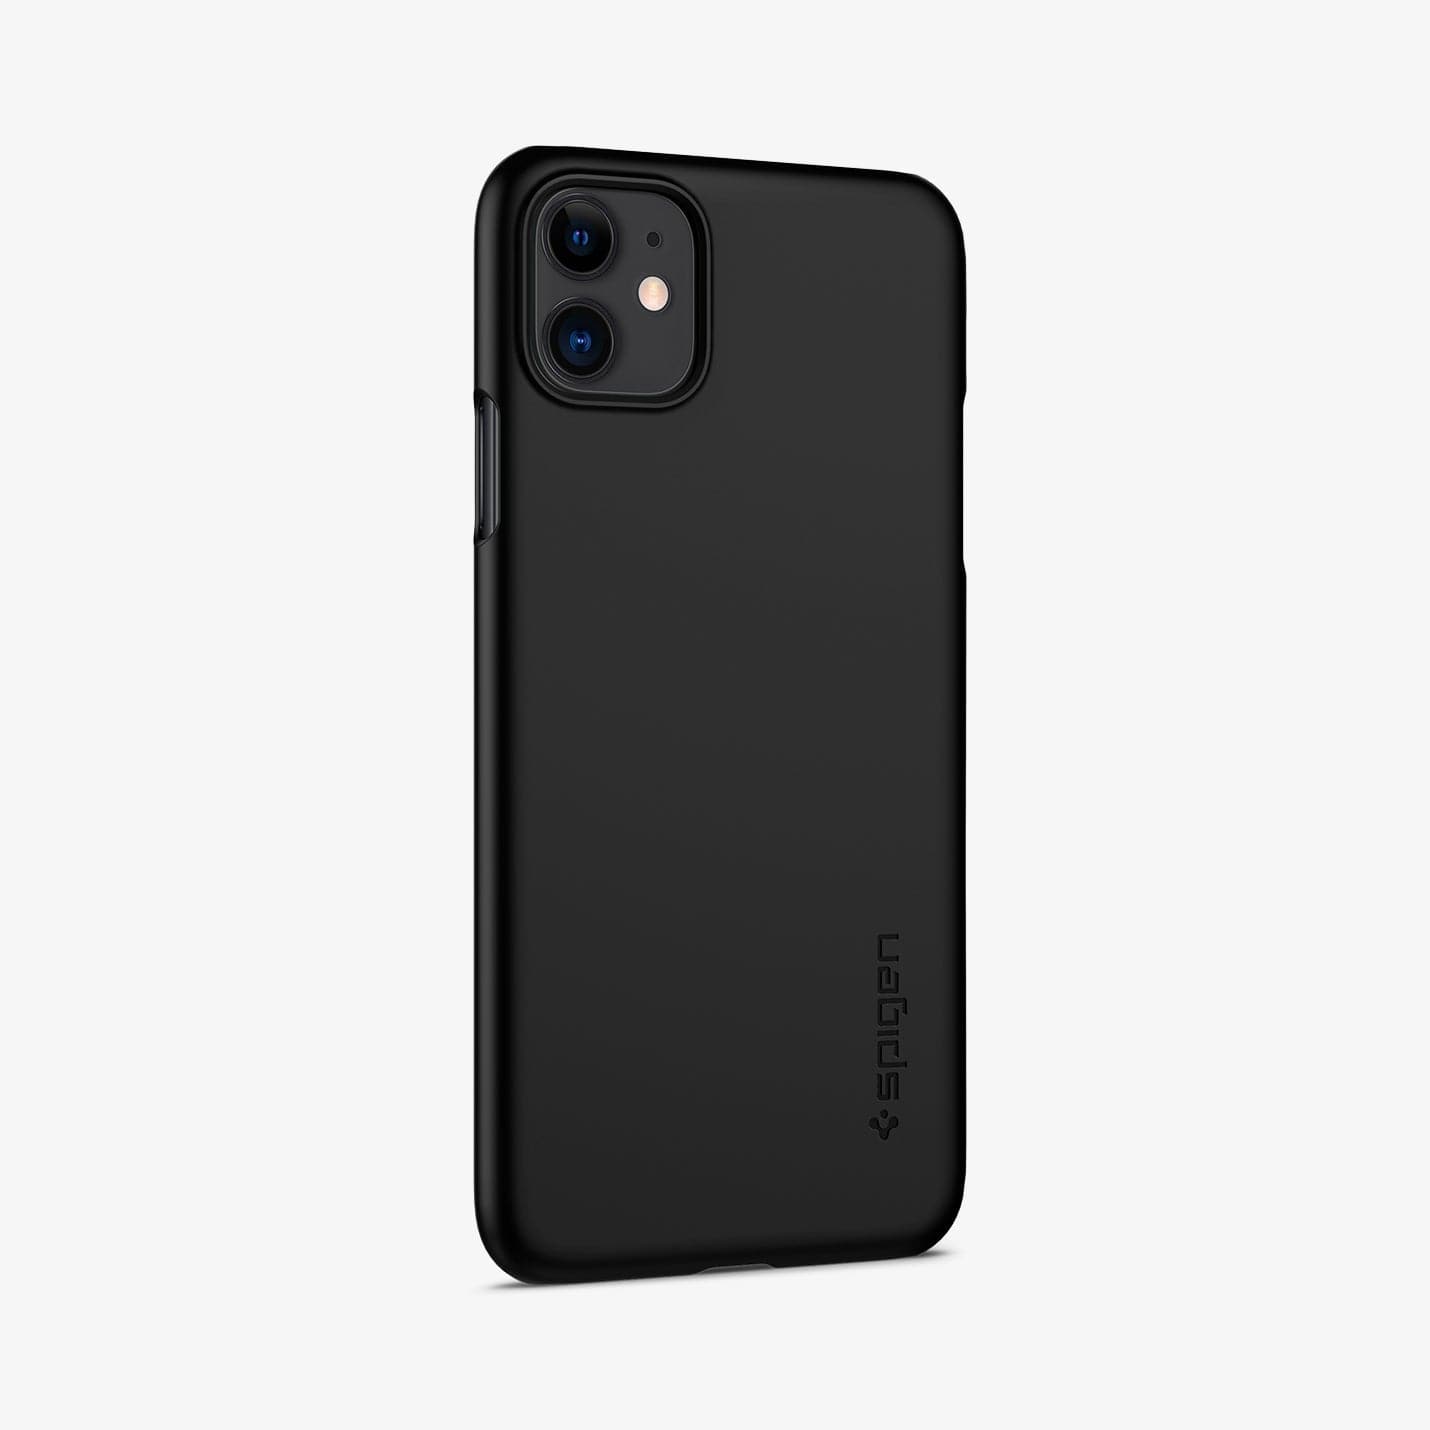 076CS27178 - iPhone 11 Case Thin Fit in black showing the back and partial side